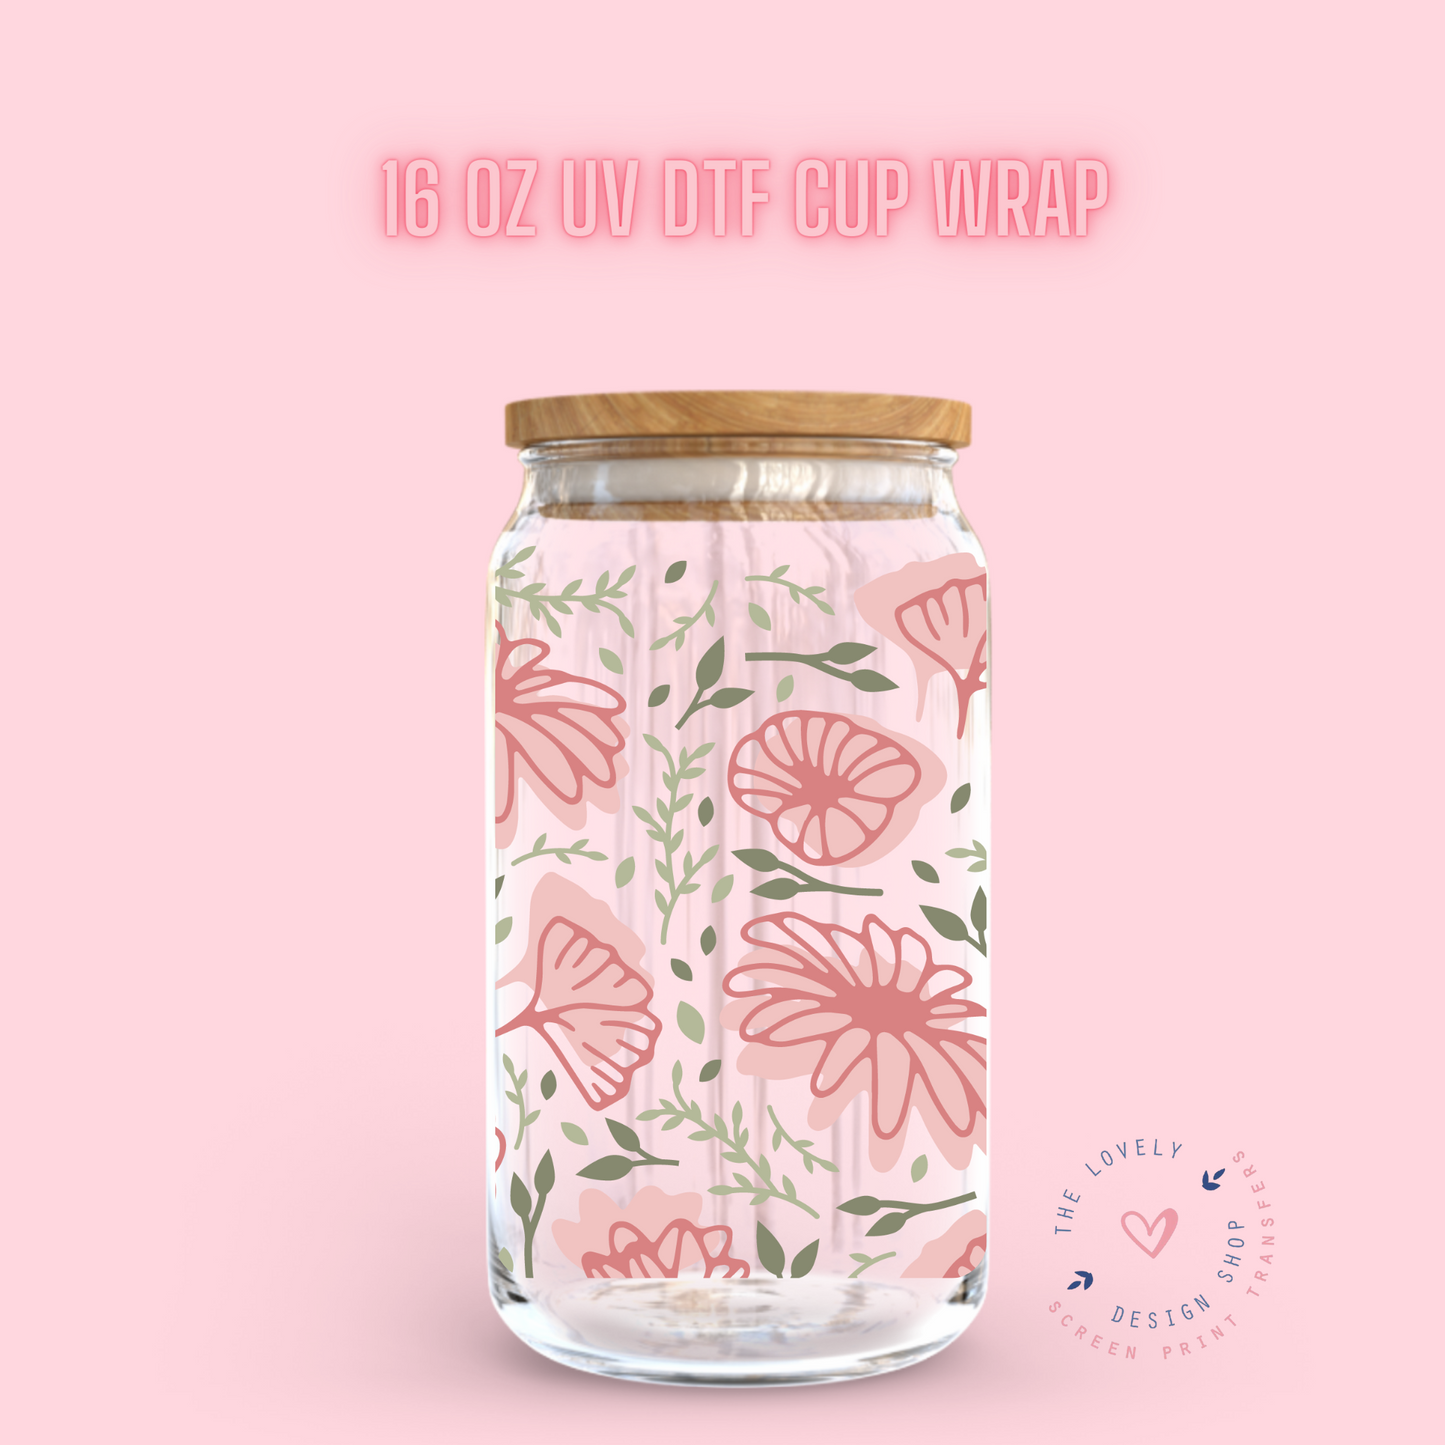 Full Bloom - UV DTF 16 oz Libbey Cup Wrap (Ready to Ship) Jan 23